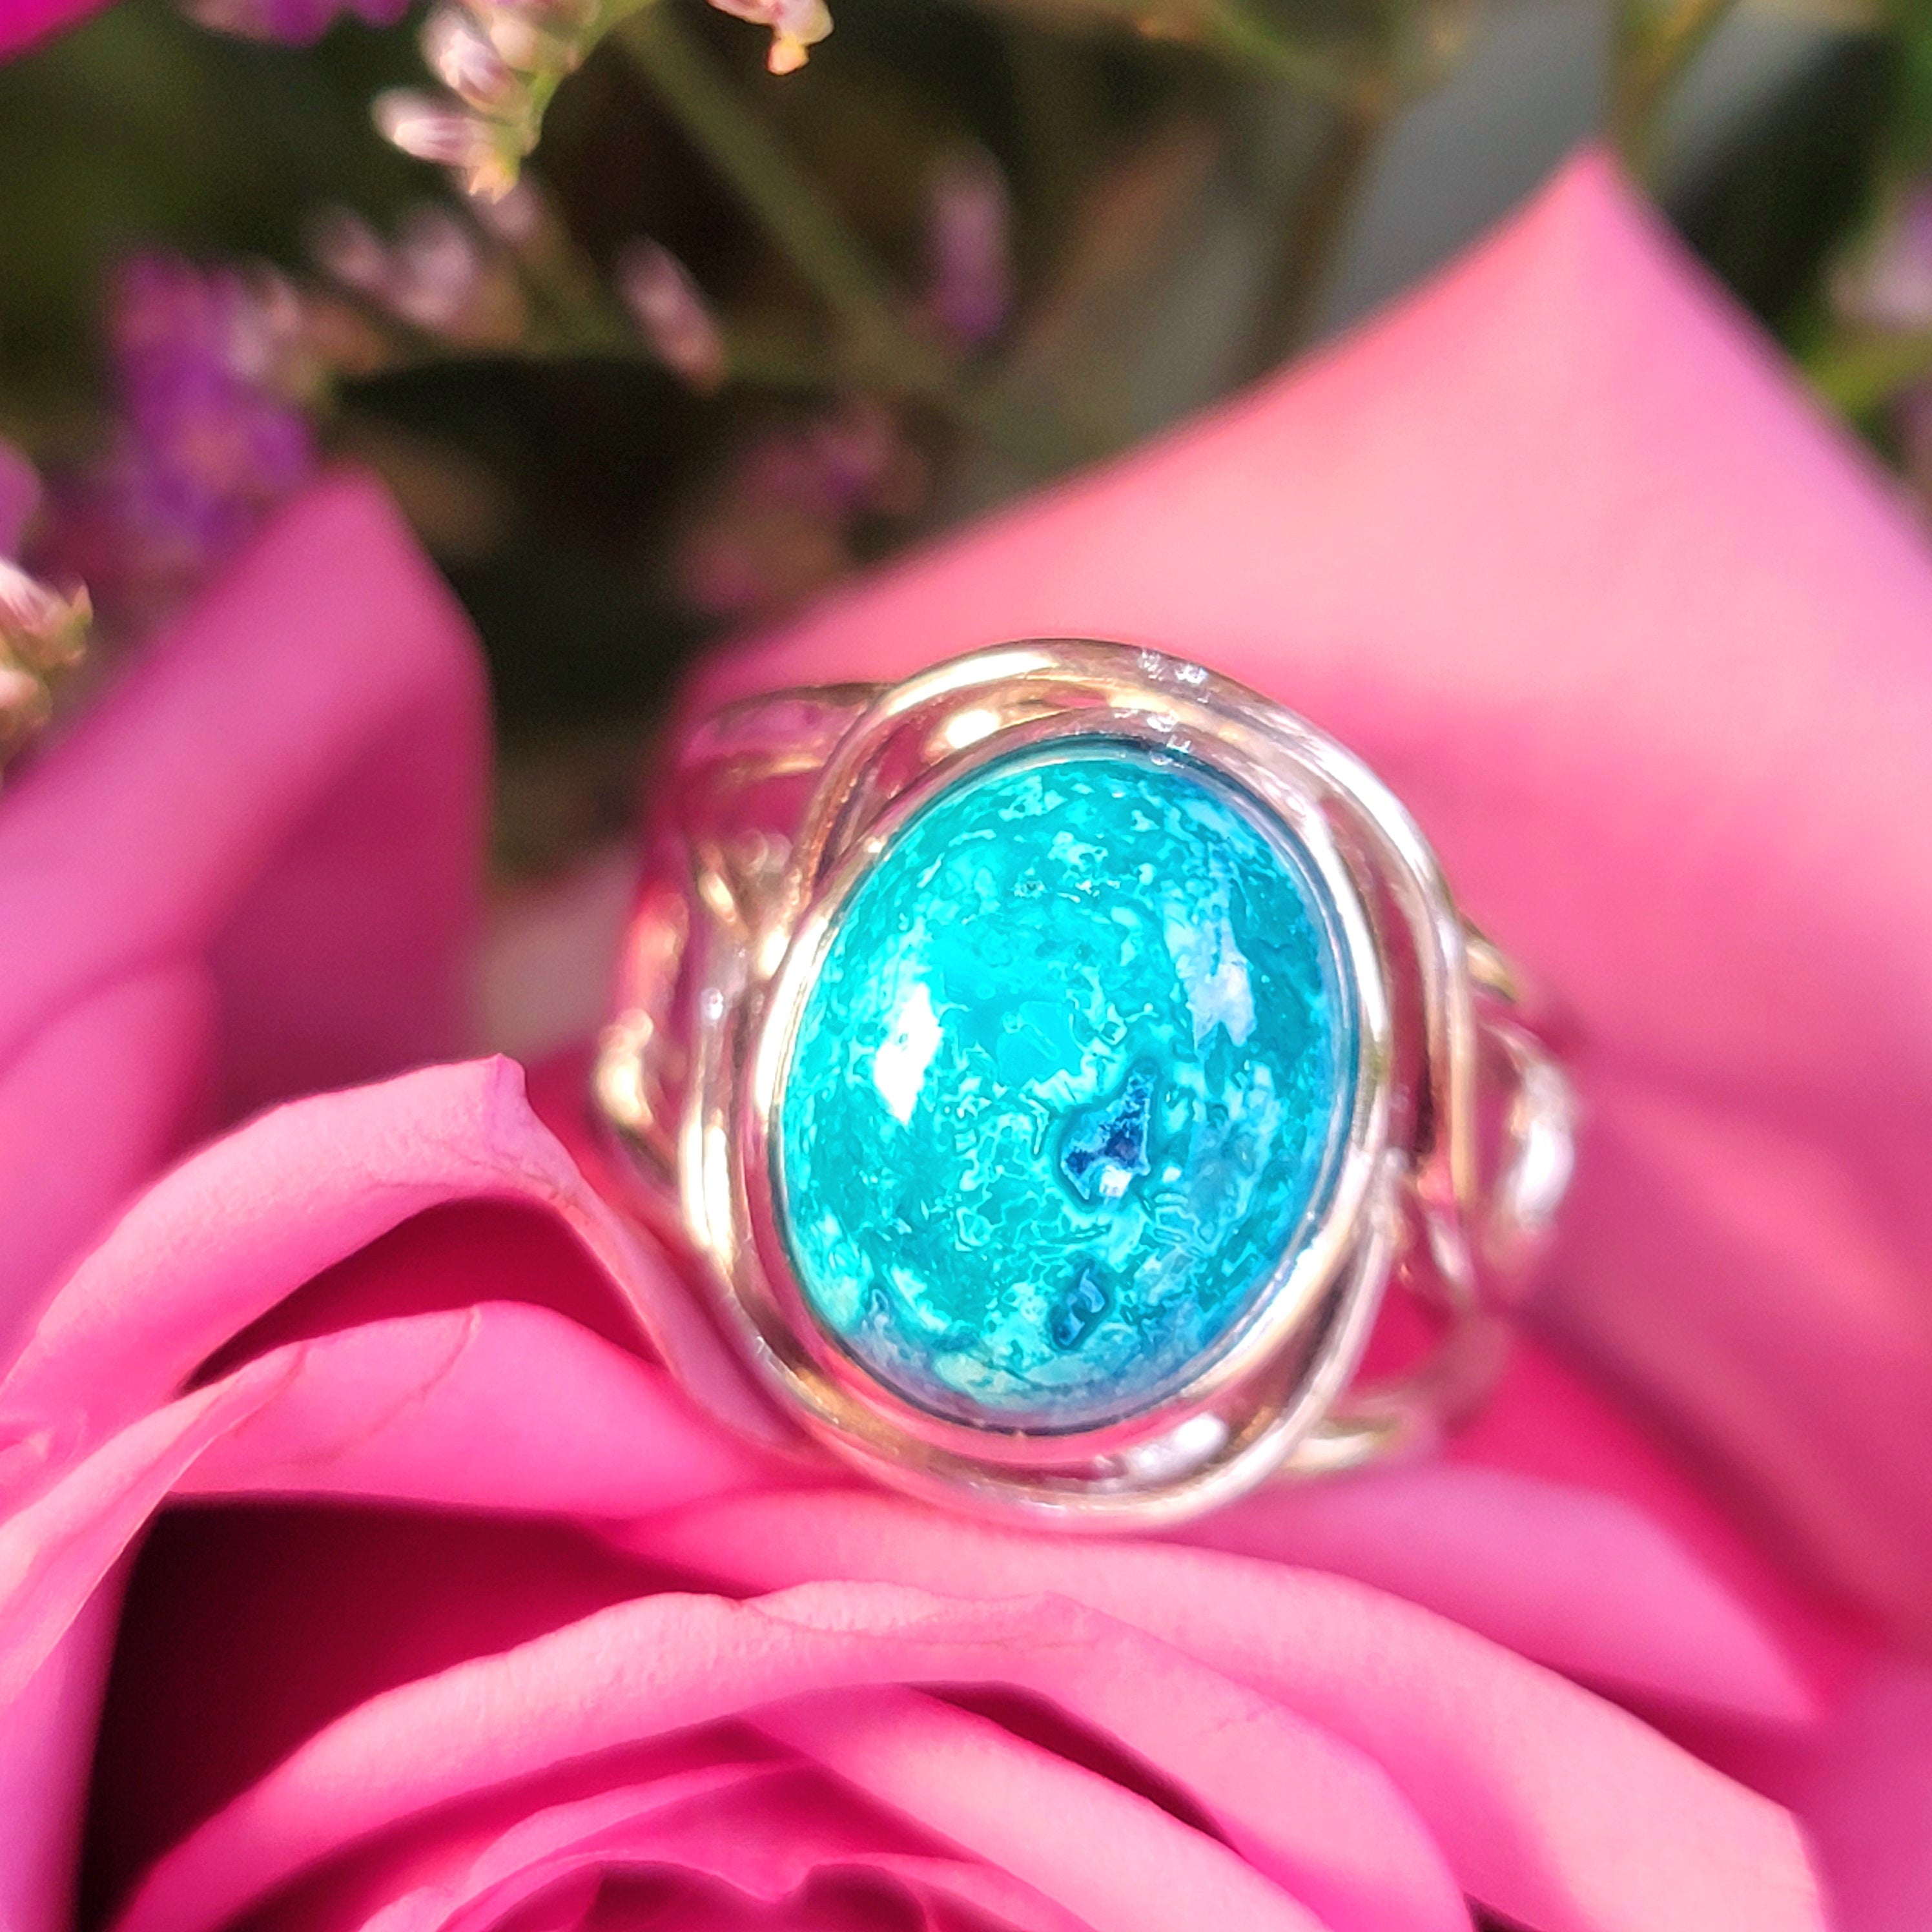 Shattuckite & Chrysocolla Finger Cuff Adjustable Ring .925 Silver for Goddess Energy, Peaceful Communication and Truth